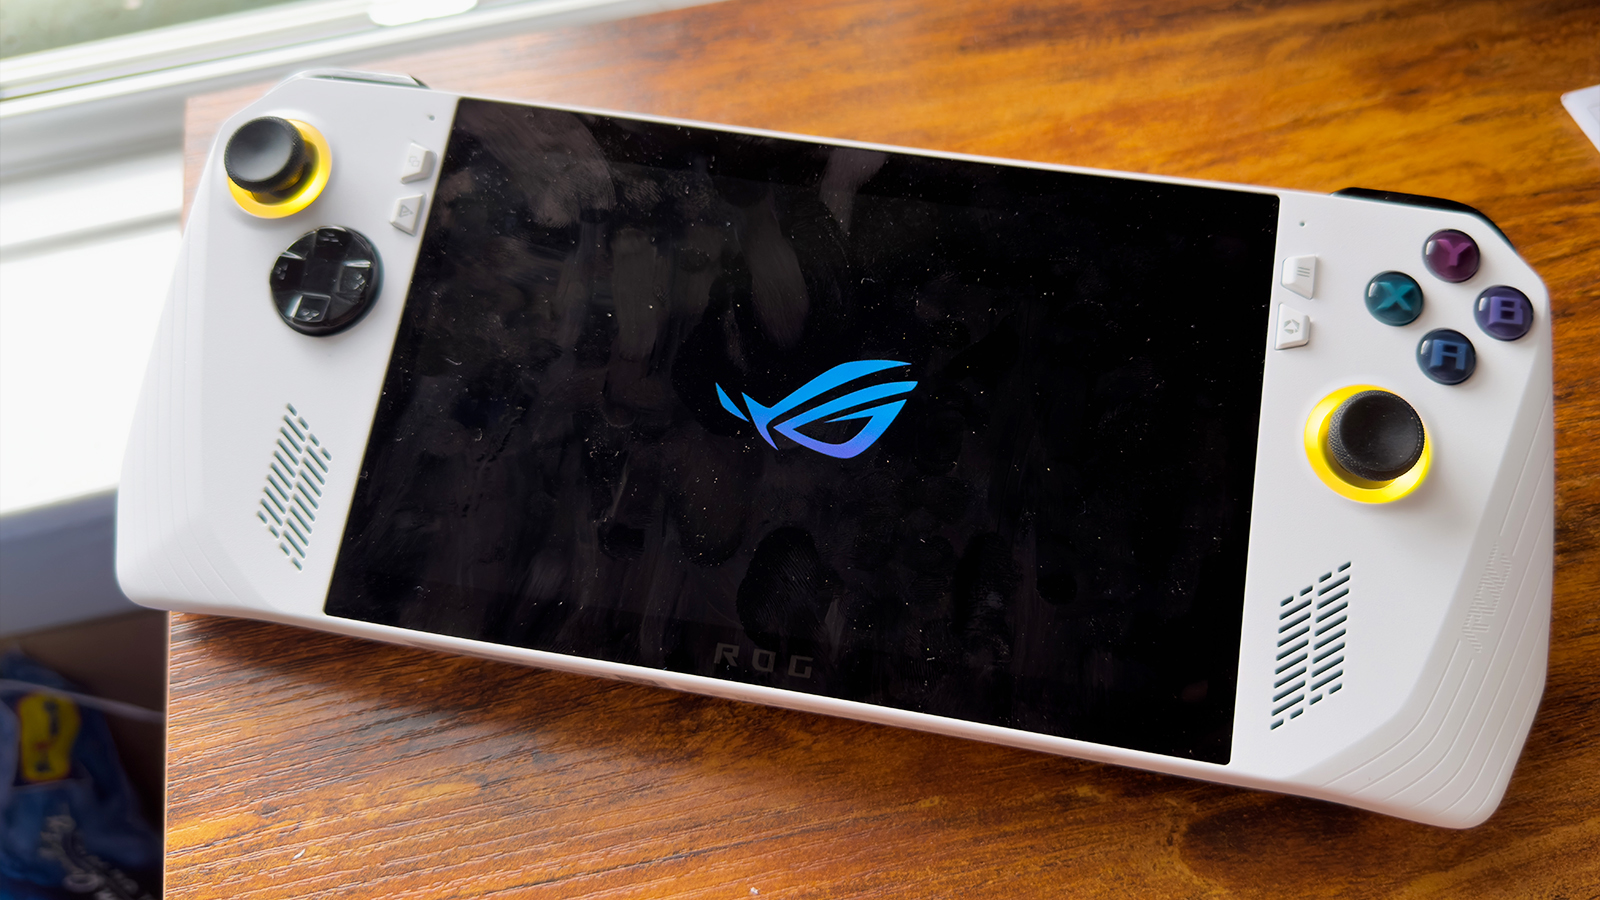 Asus ROG Ally review: Windows in a portable gaming PC